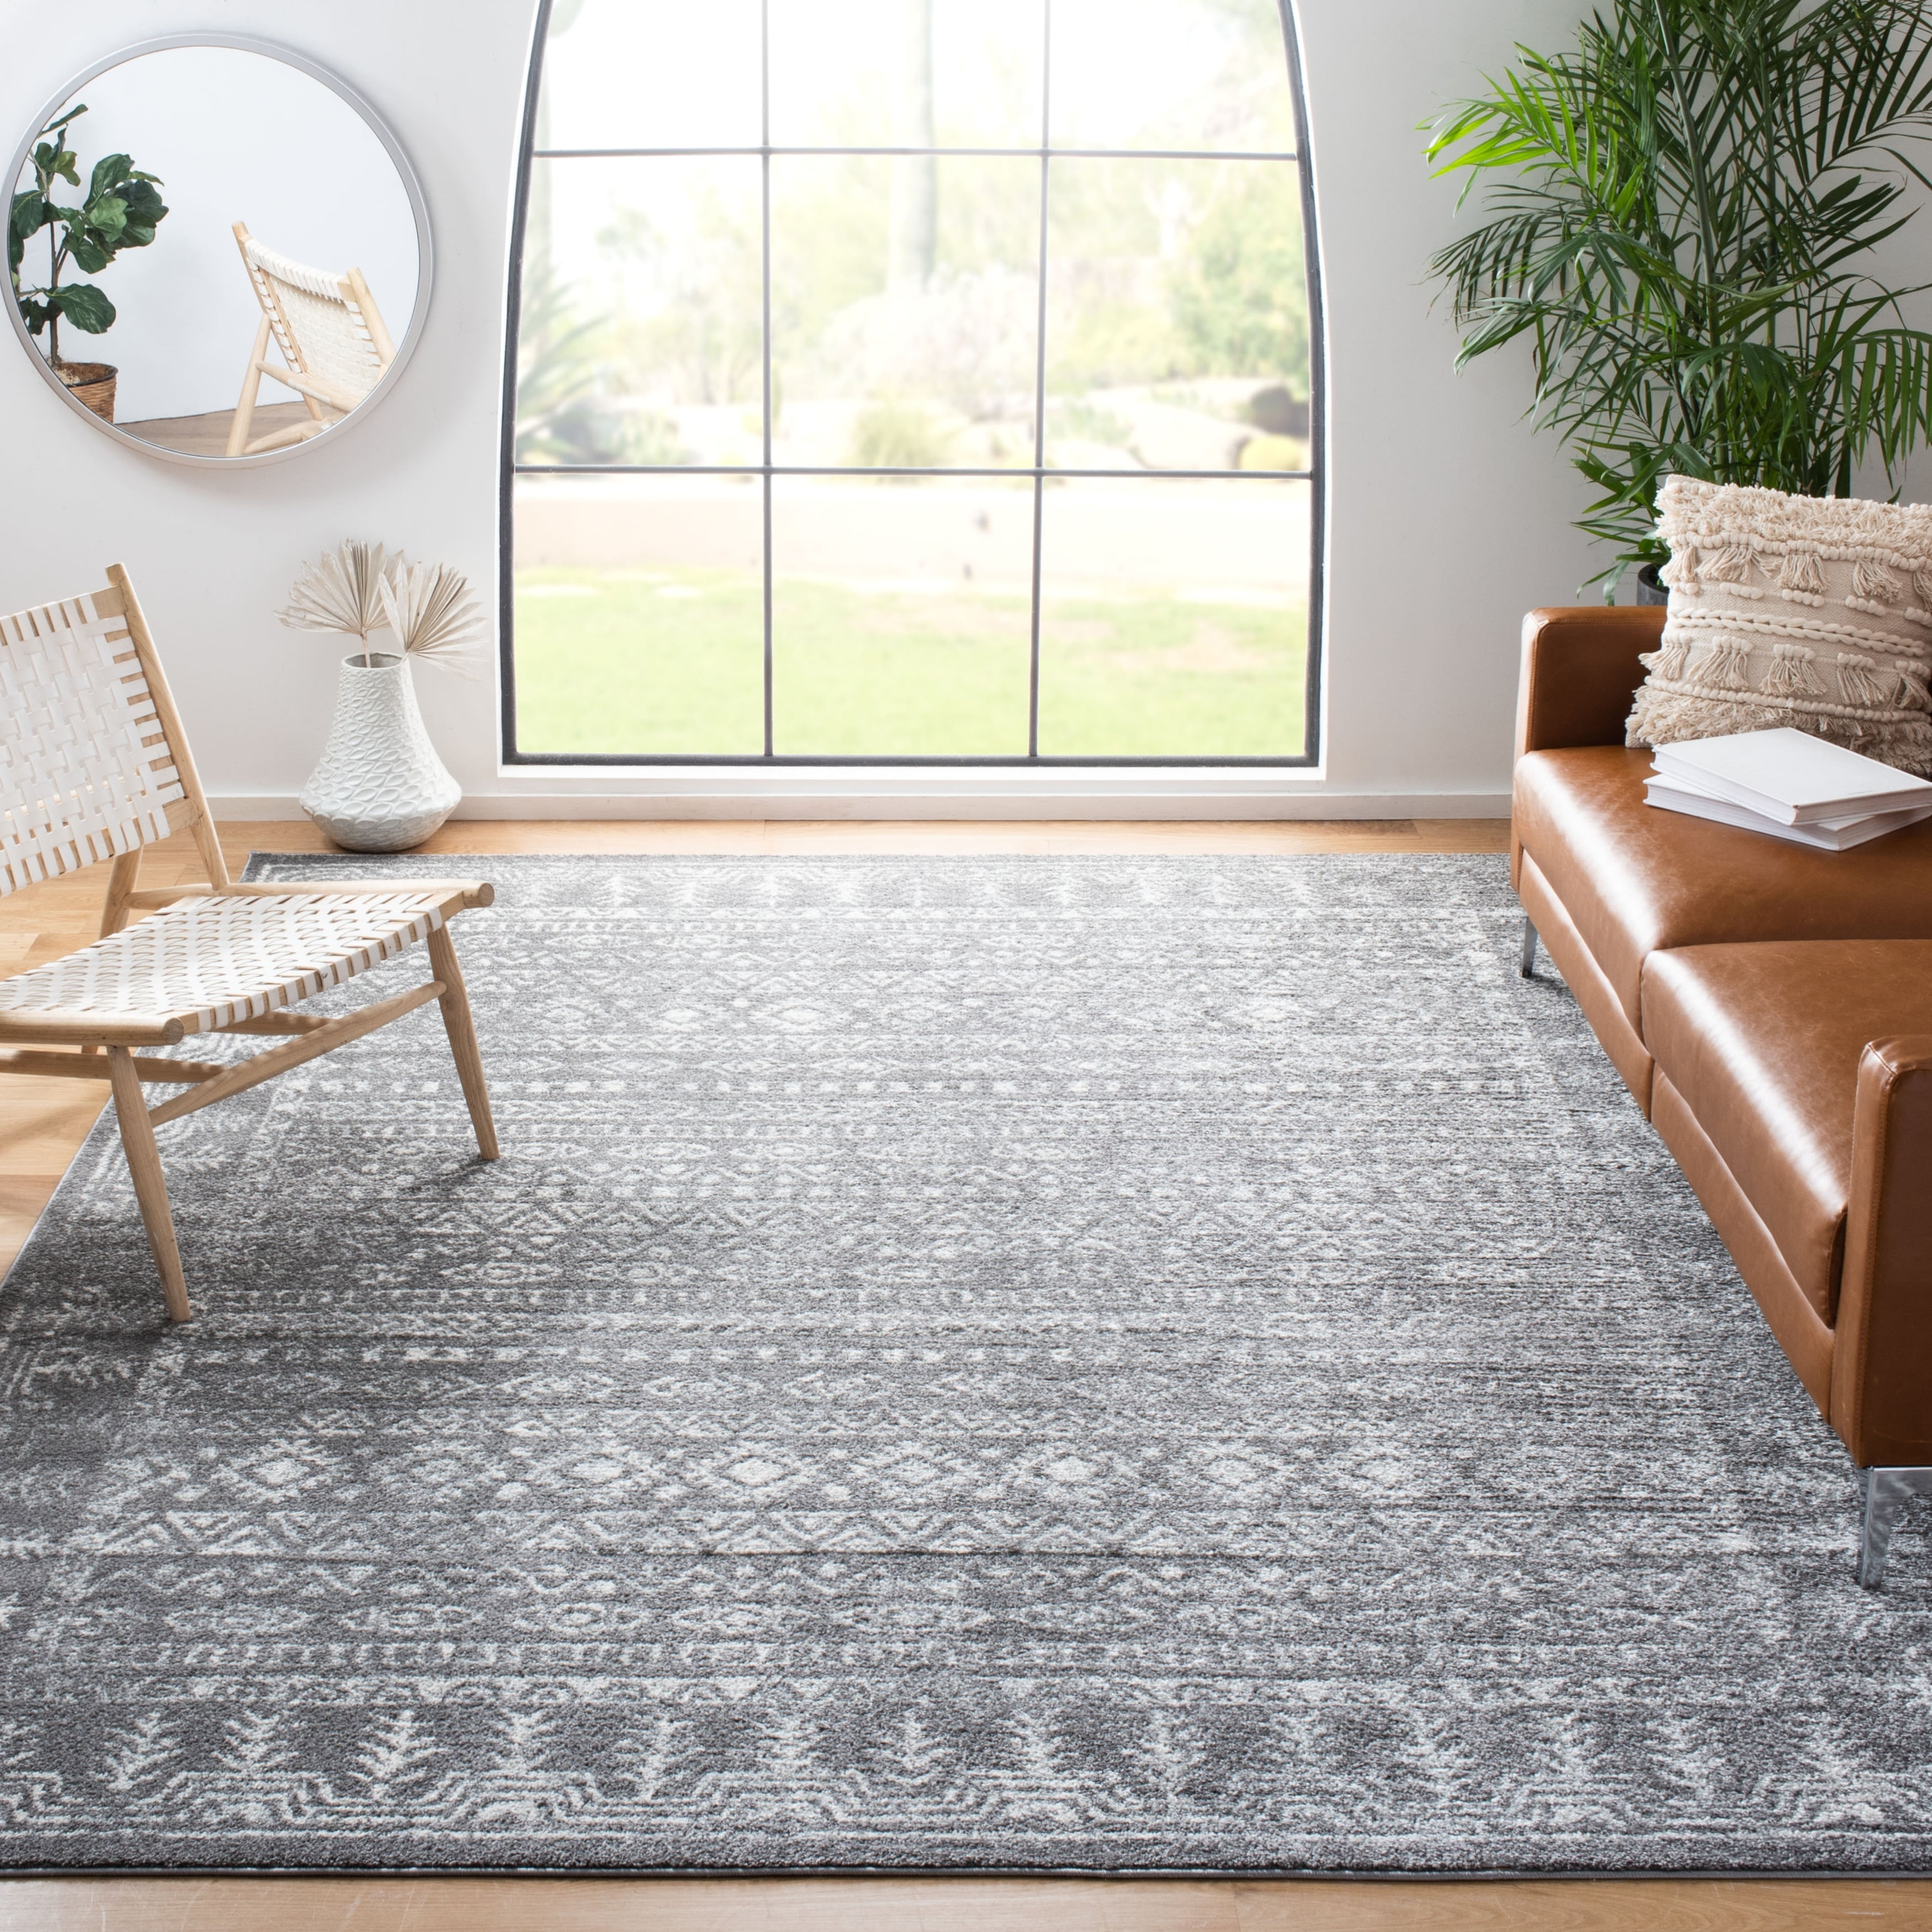 Large Terra Grey Moroccan Rug Traditional Rugs For Living Room Scandi Boho Mats 